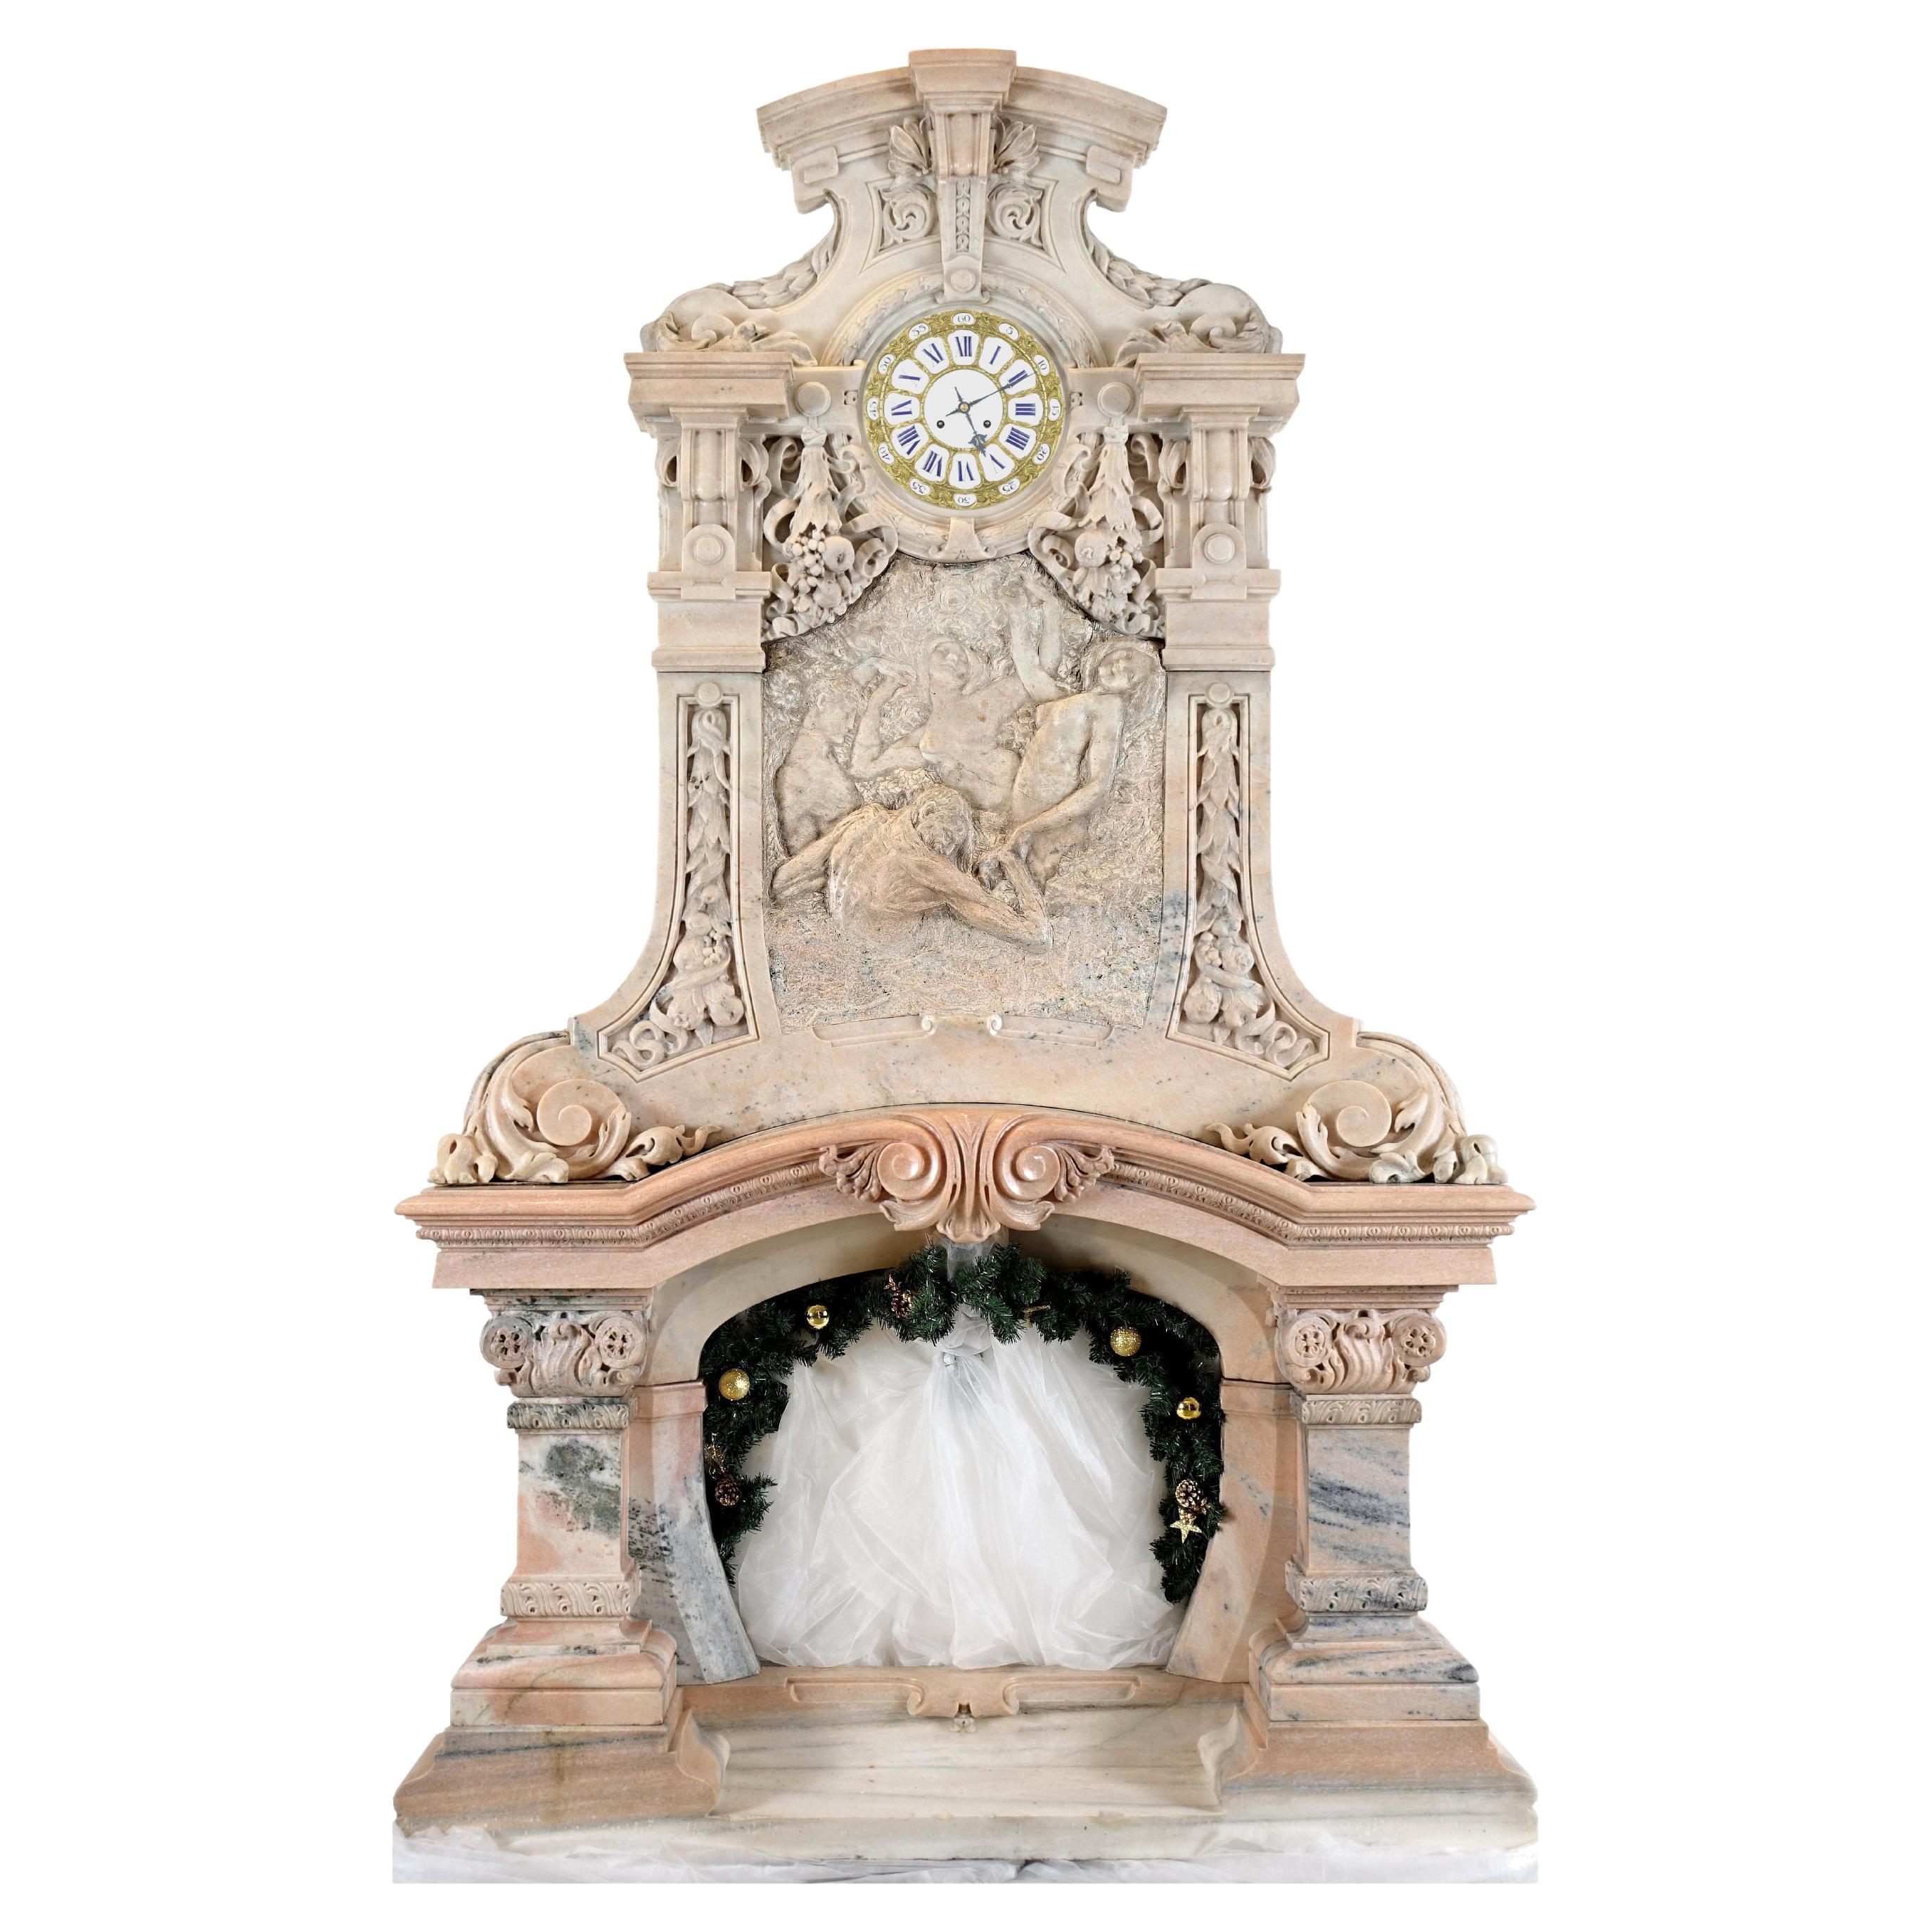 Fireplace with a Clock, "Candoglia" Marble of the Cathedral of Milan, 1895-1910 For Sale